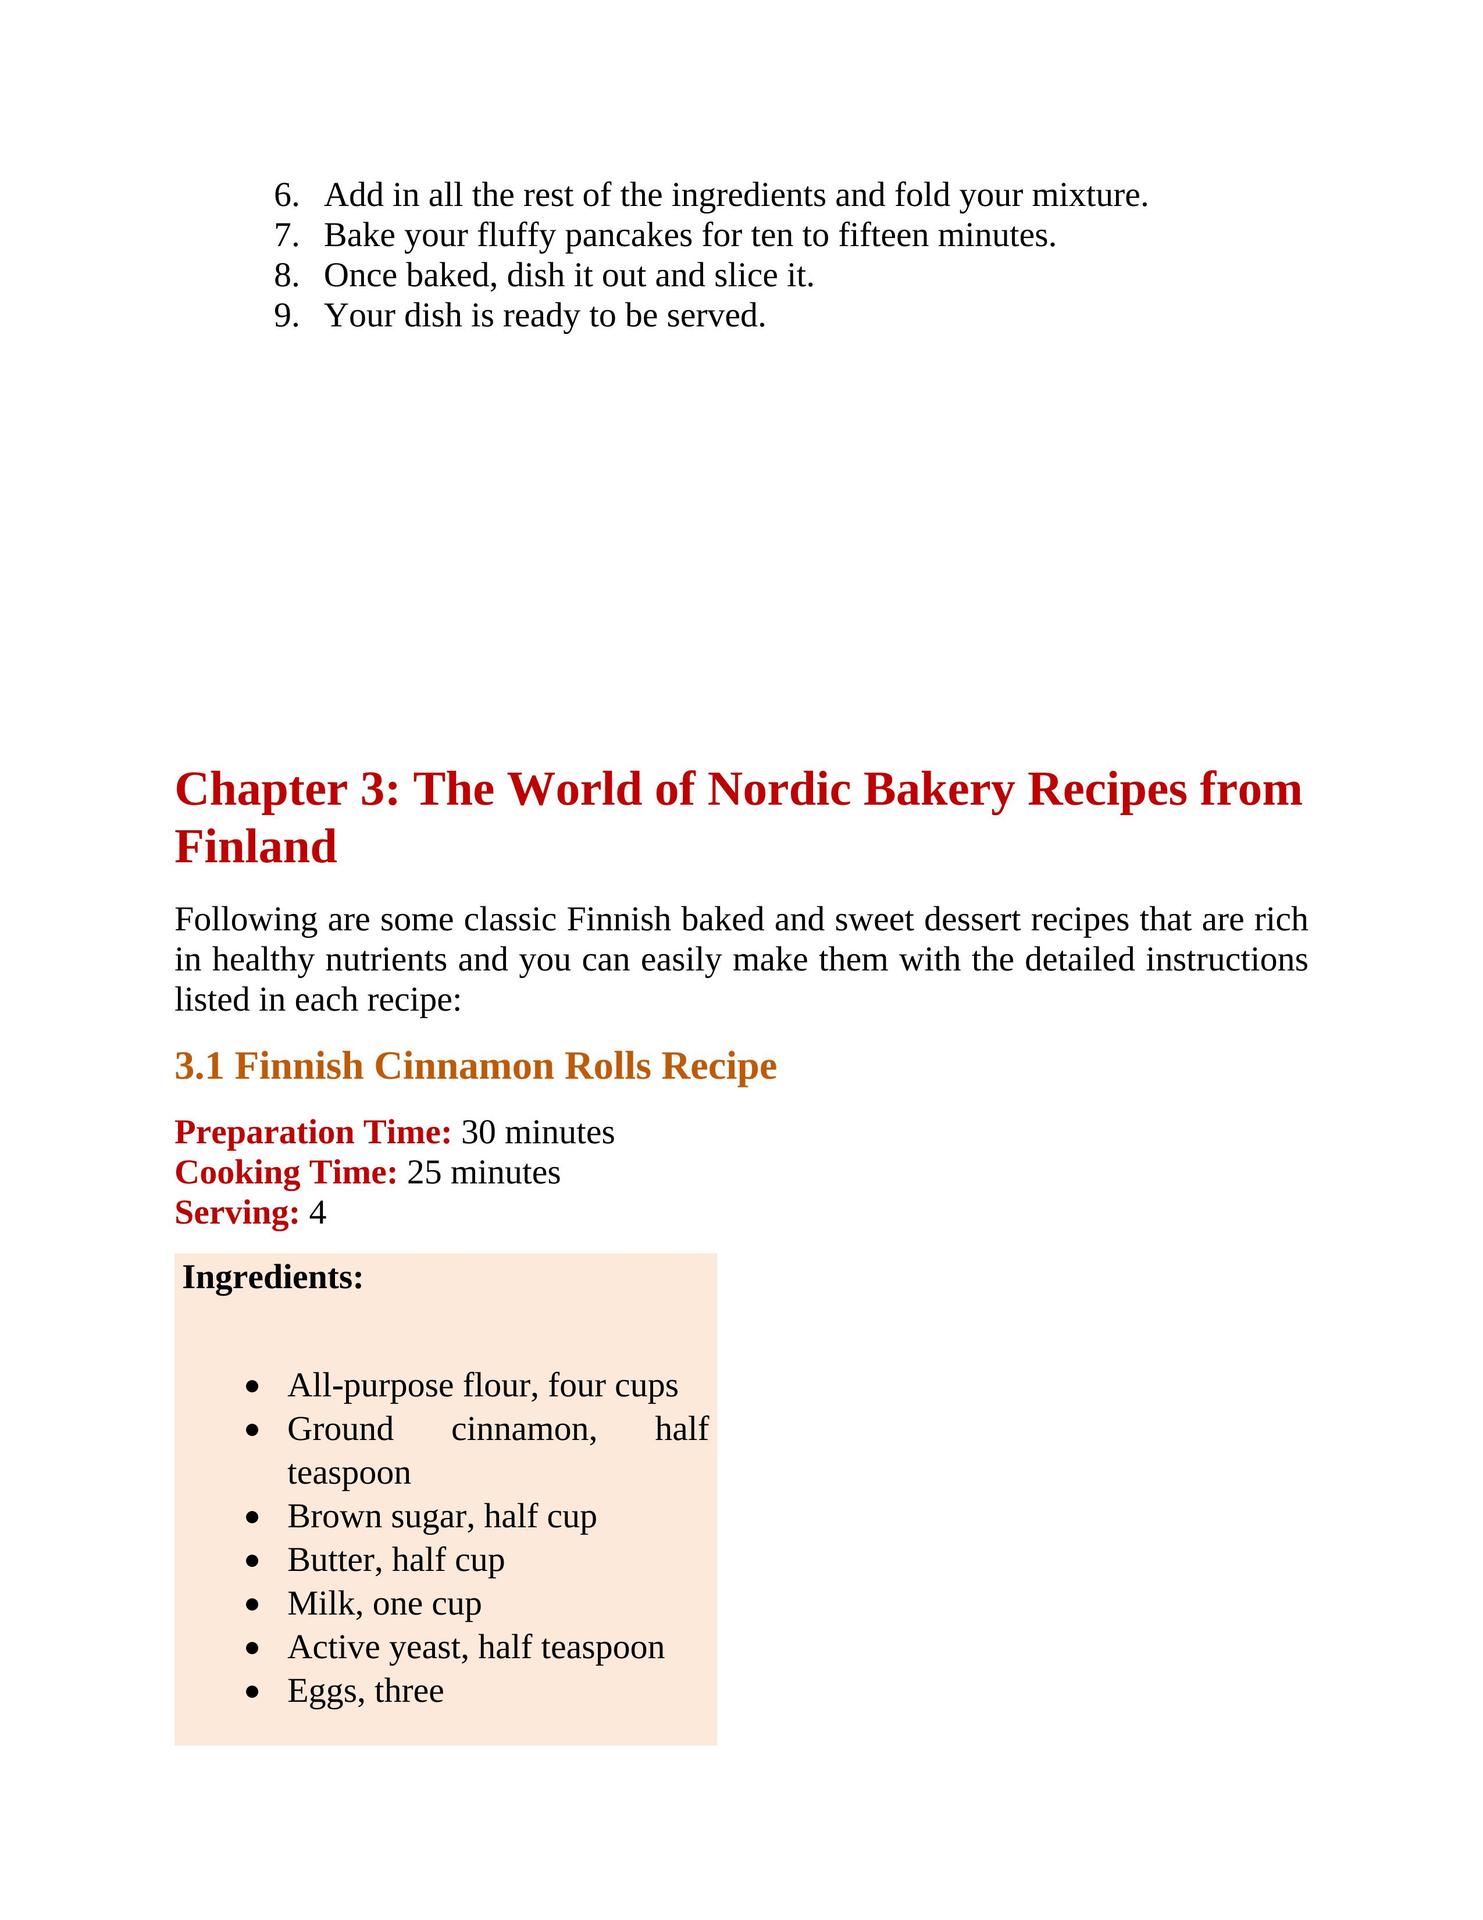 The New Nordic Bakery Cookbook 77 Delicious Scandinavian Recipes from Northern European countries - photo 28